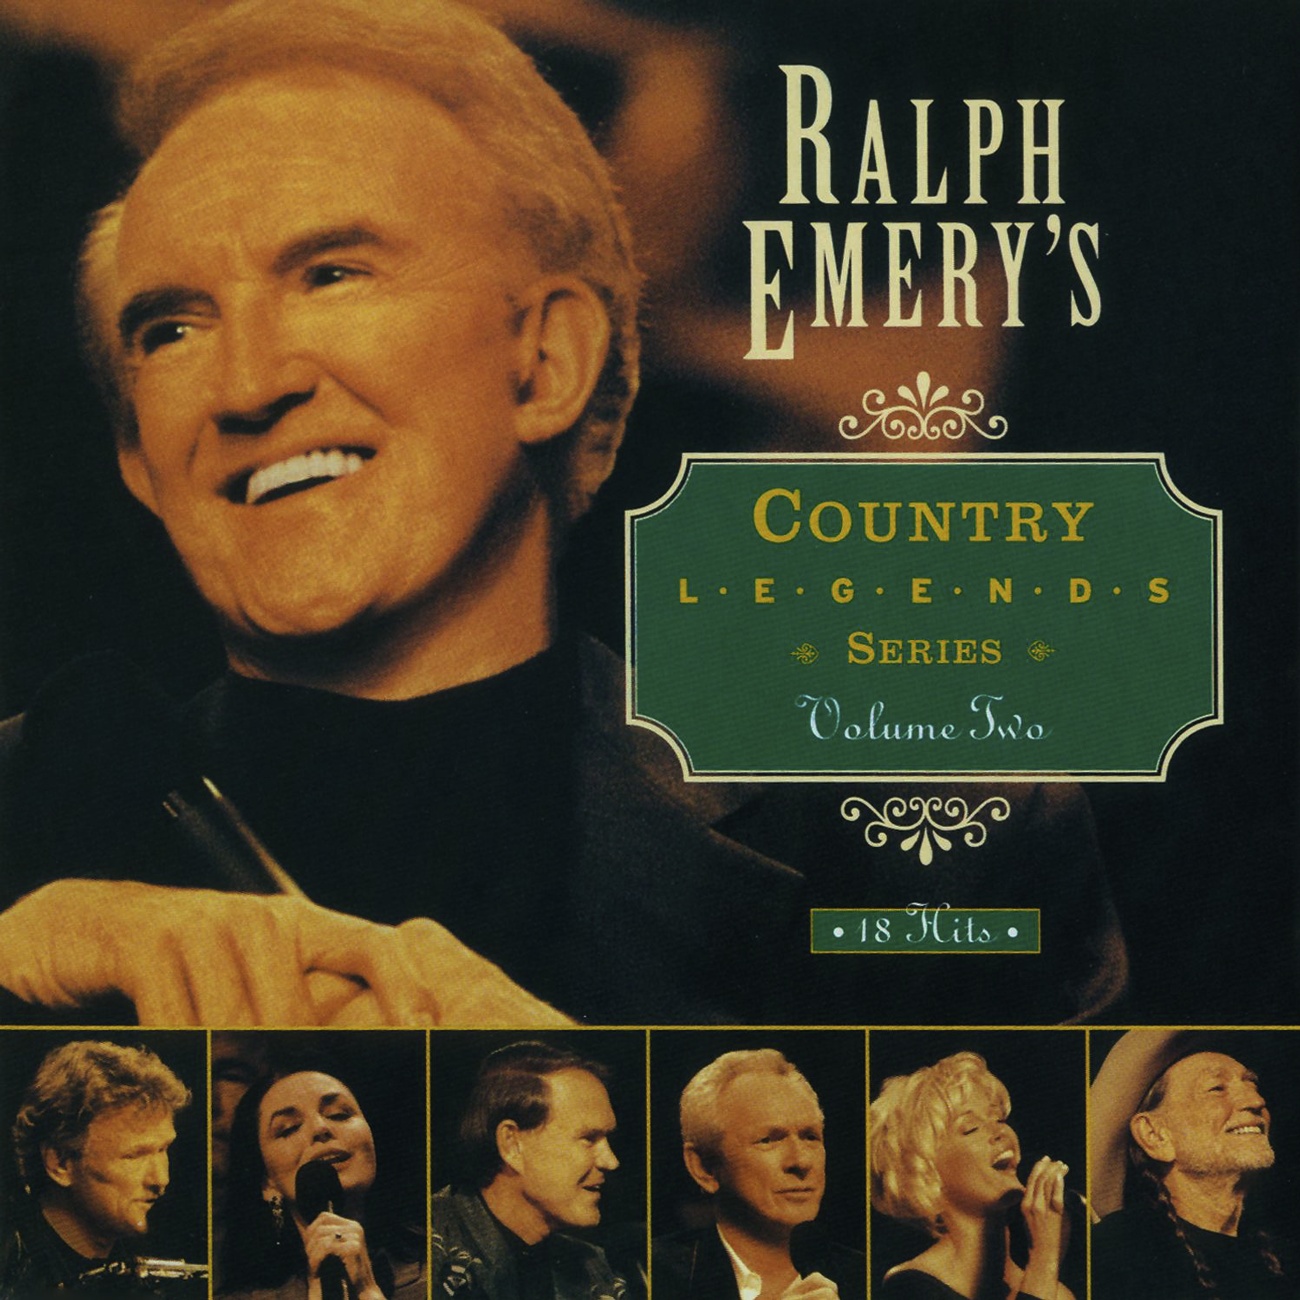 Dream Baby (Ralph Emery's Country Legends Homecoming Vol 2 album version)